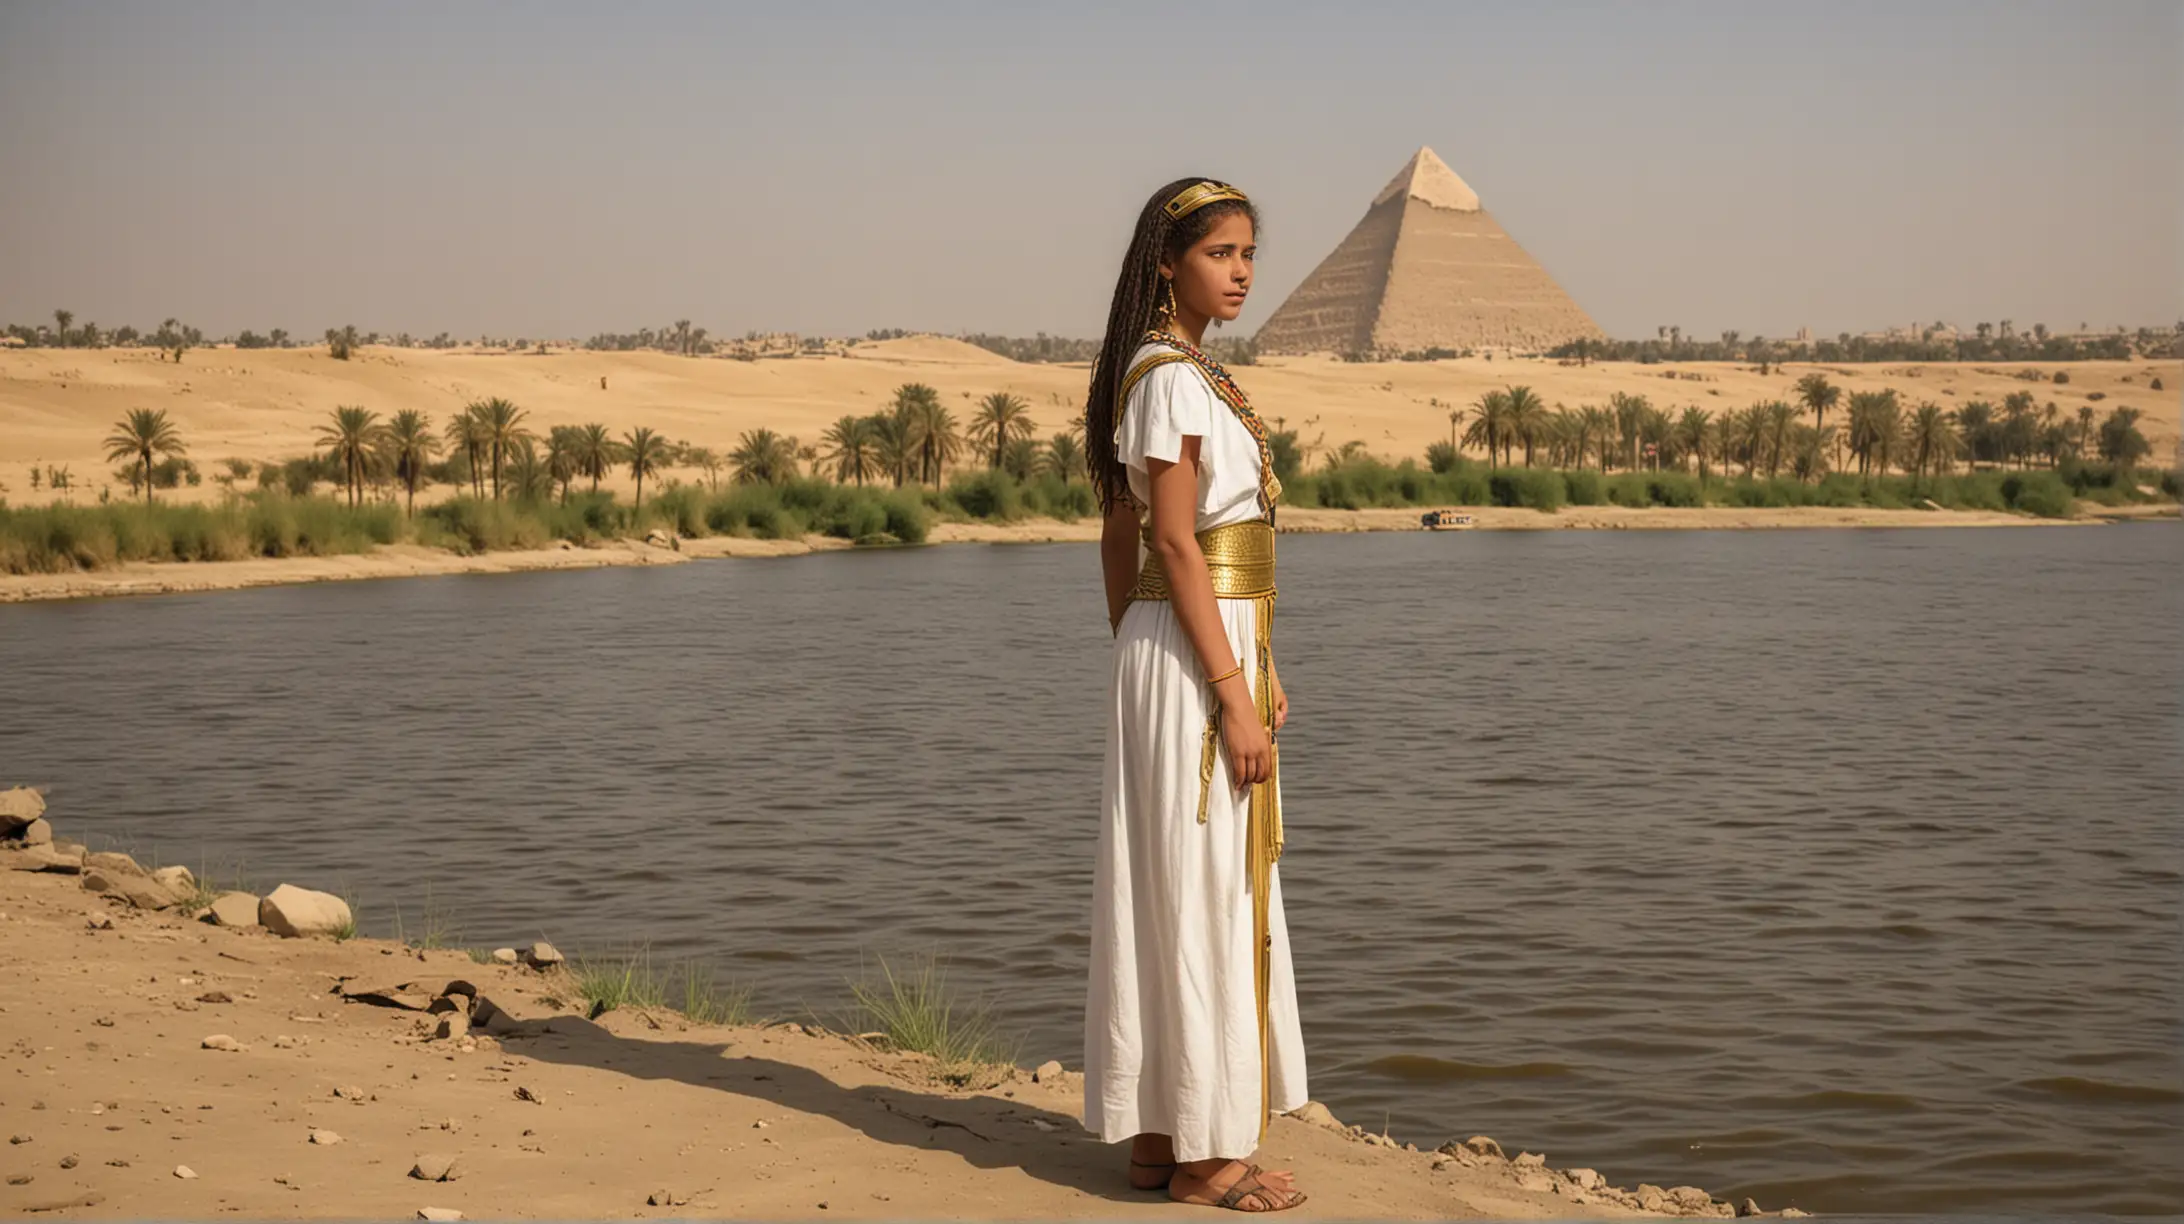 Pharaohs Daughter by the Nile